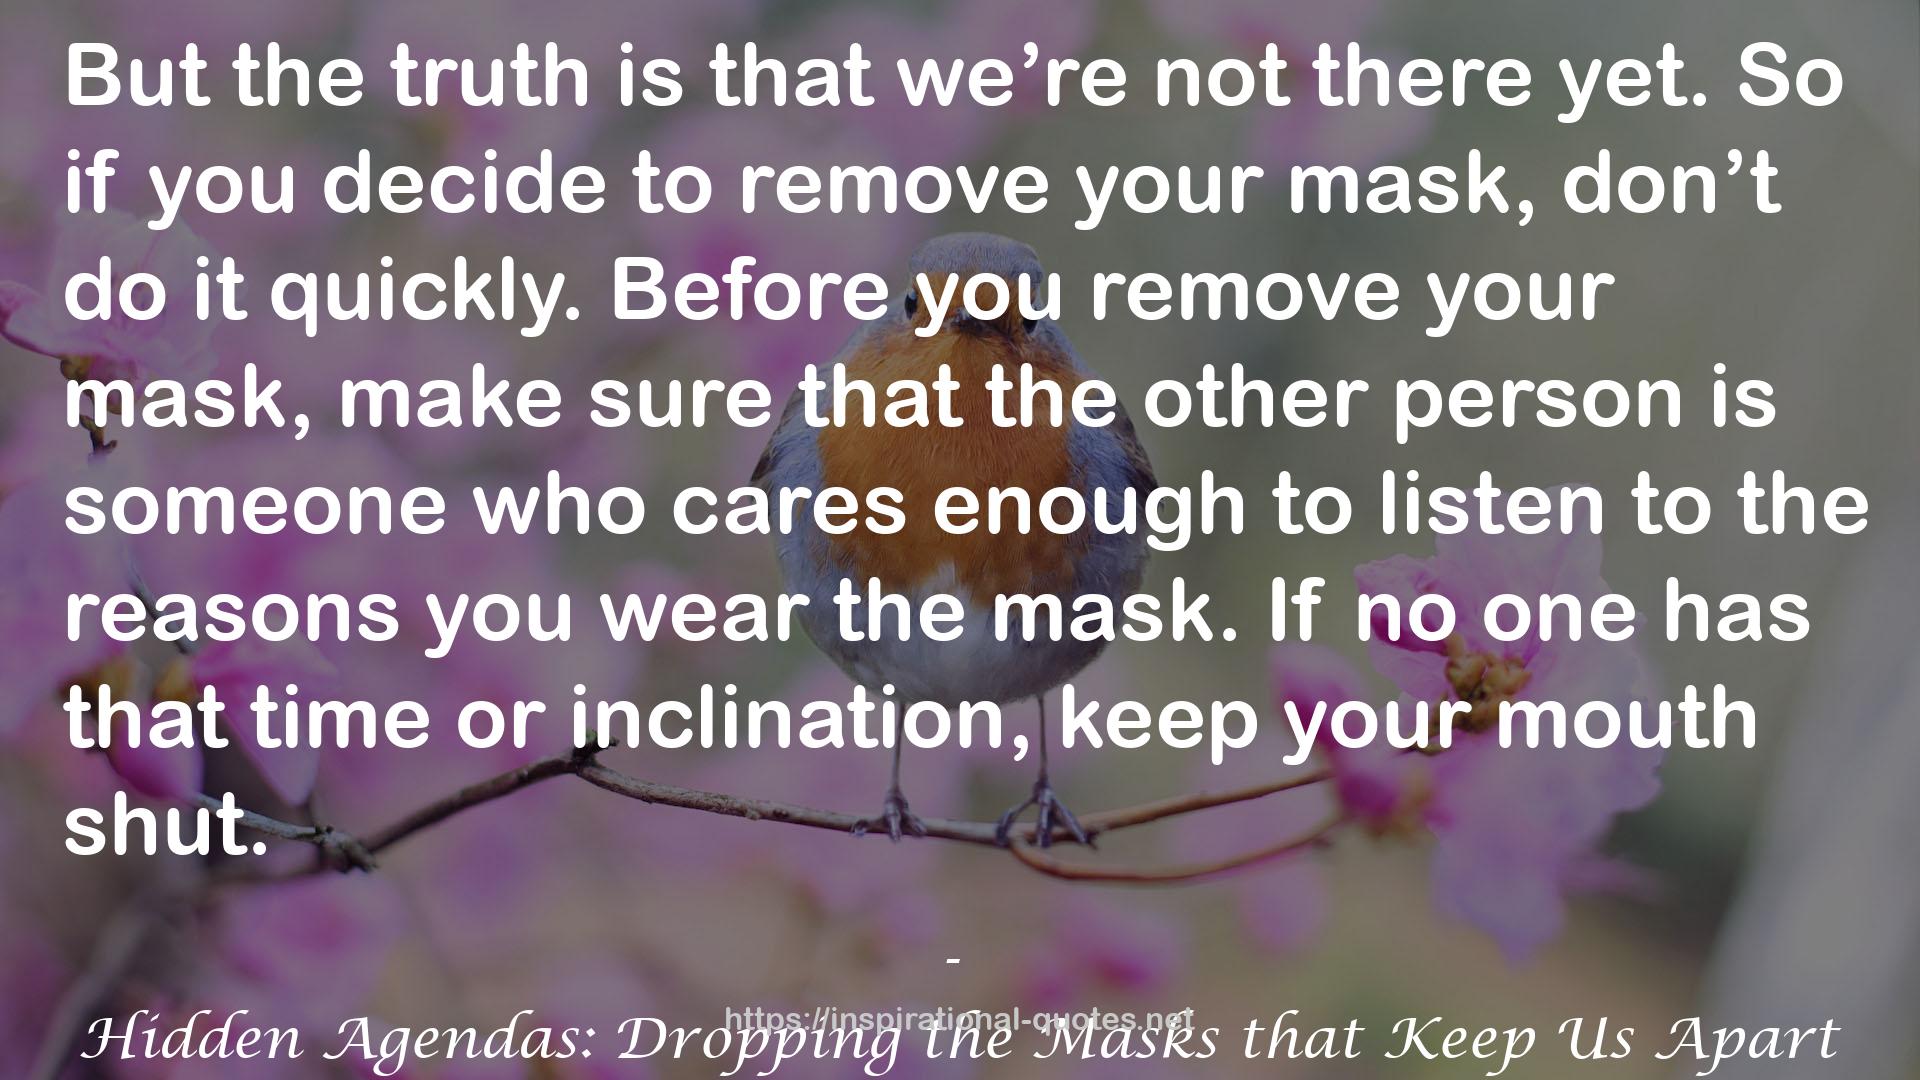 Hidden Agendas: Dropping the Masks that Keep Us Apart QUOTES